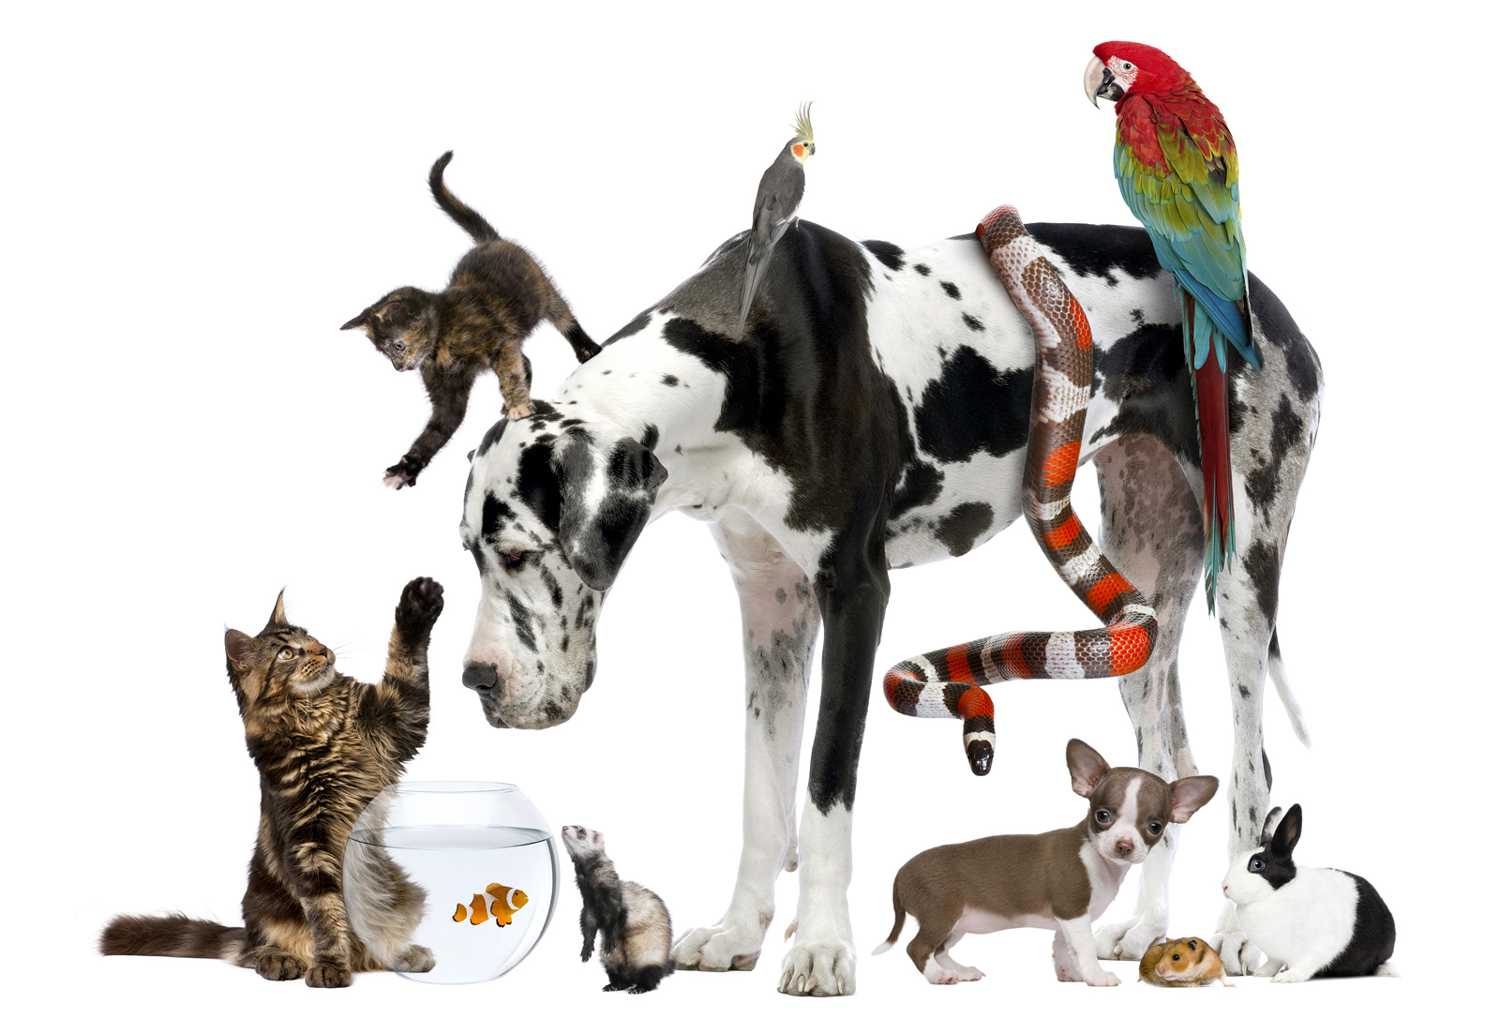 A group of pets includes two cats, two dogs, fish, a snake, a turtle, a hamster, a ferret, a parrot, and a rabbit.